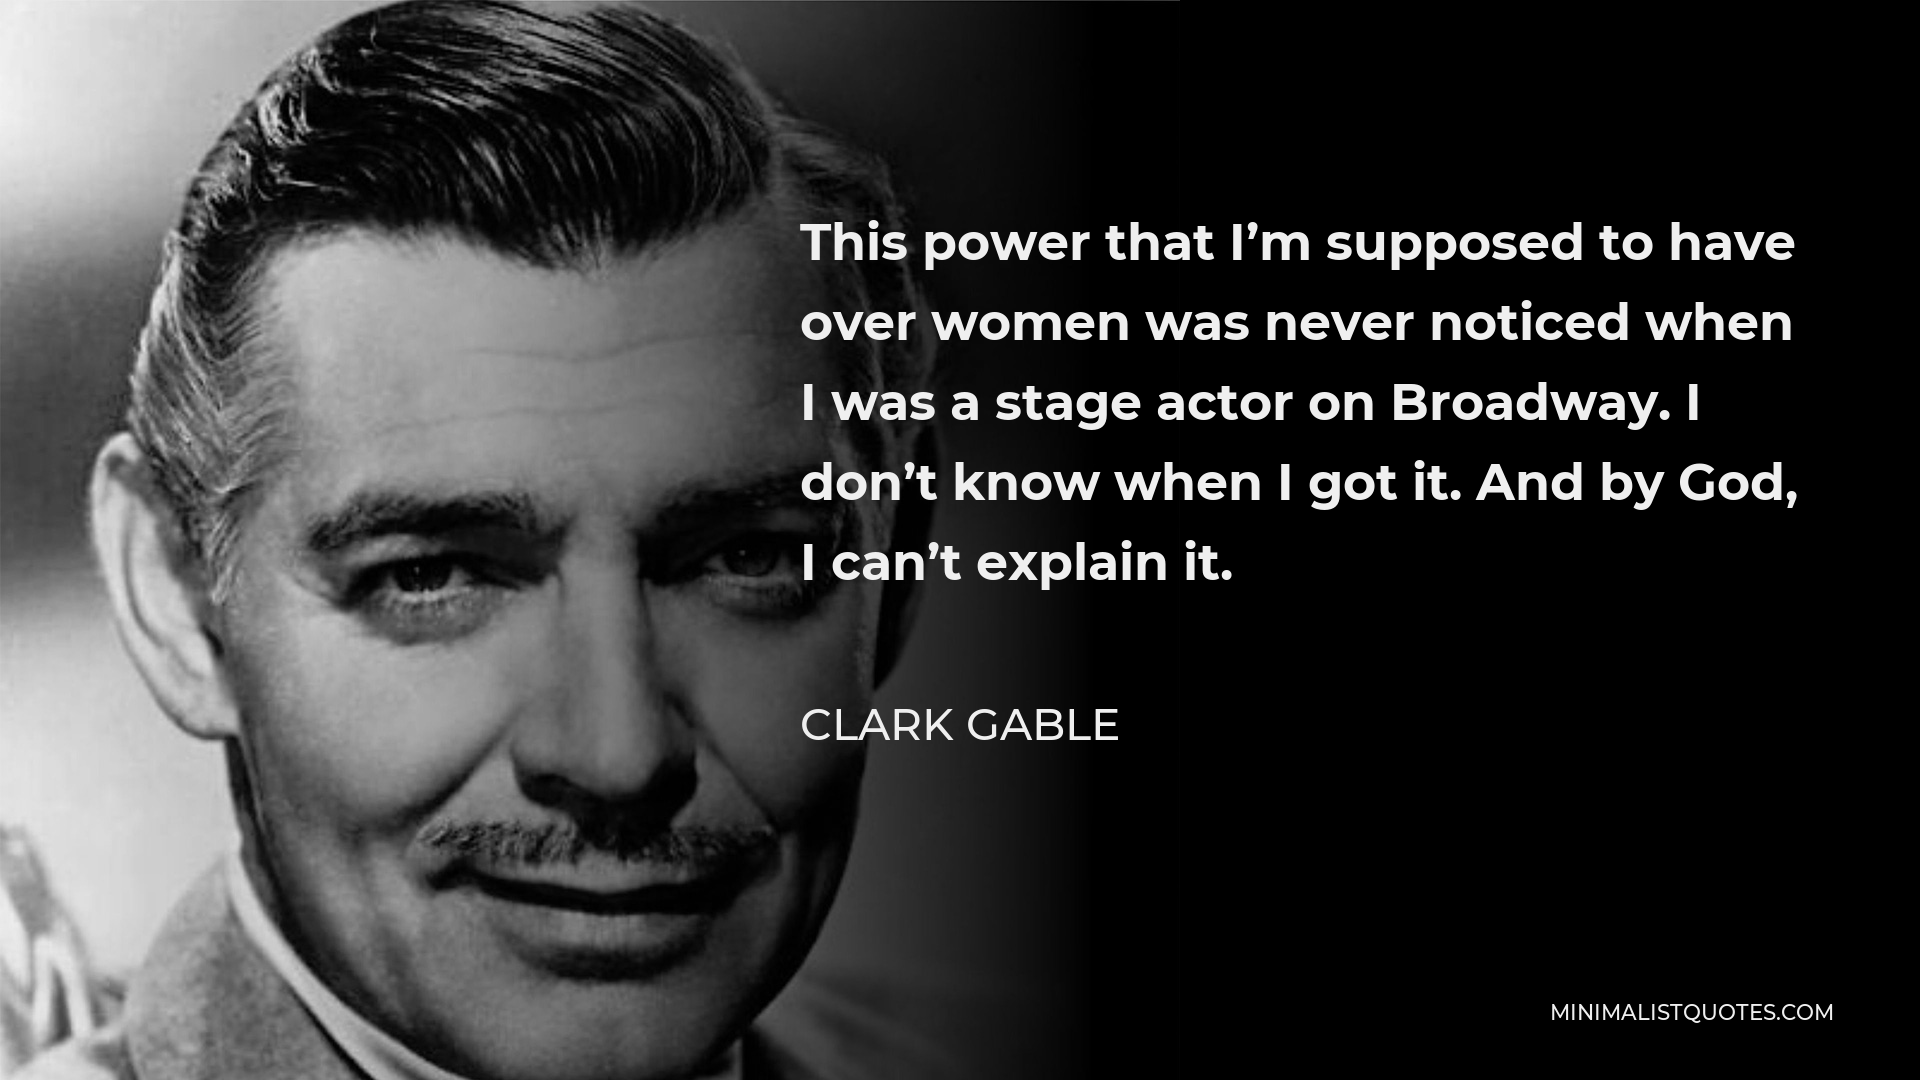 Clark Gable Quote - This power that I’m supposed to have over women was never noticed when I was a stage actor on Broadway. I don’t know when I got it. And by God, I can’t explain it.